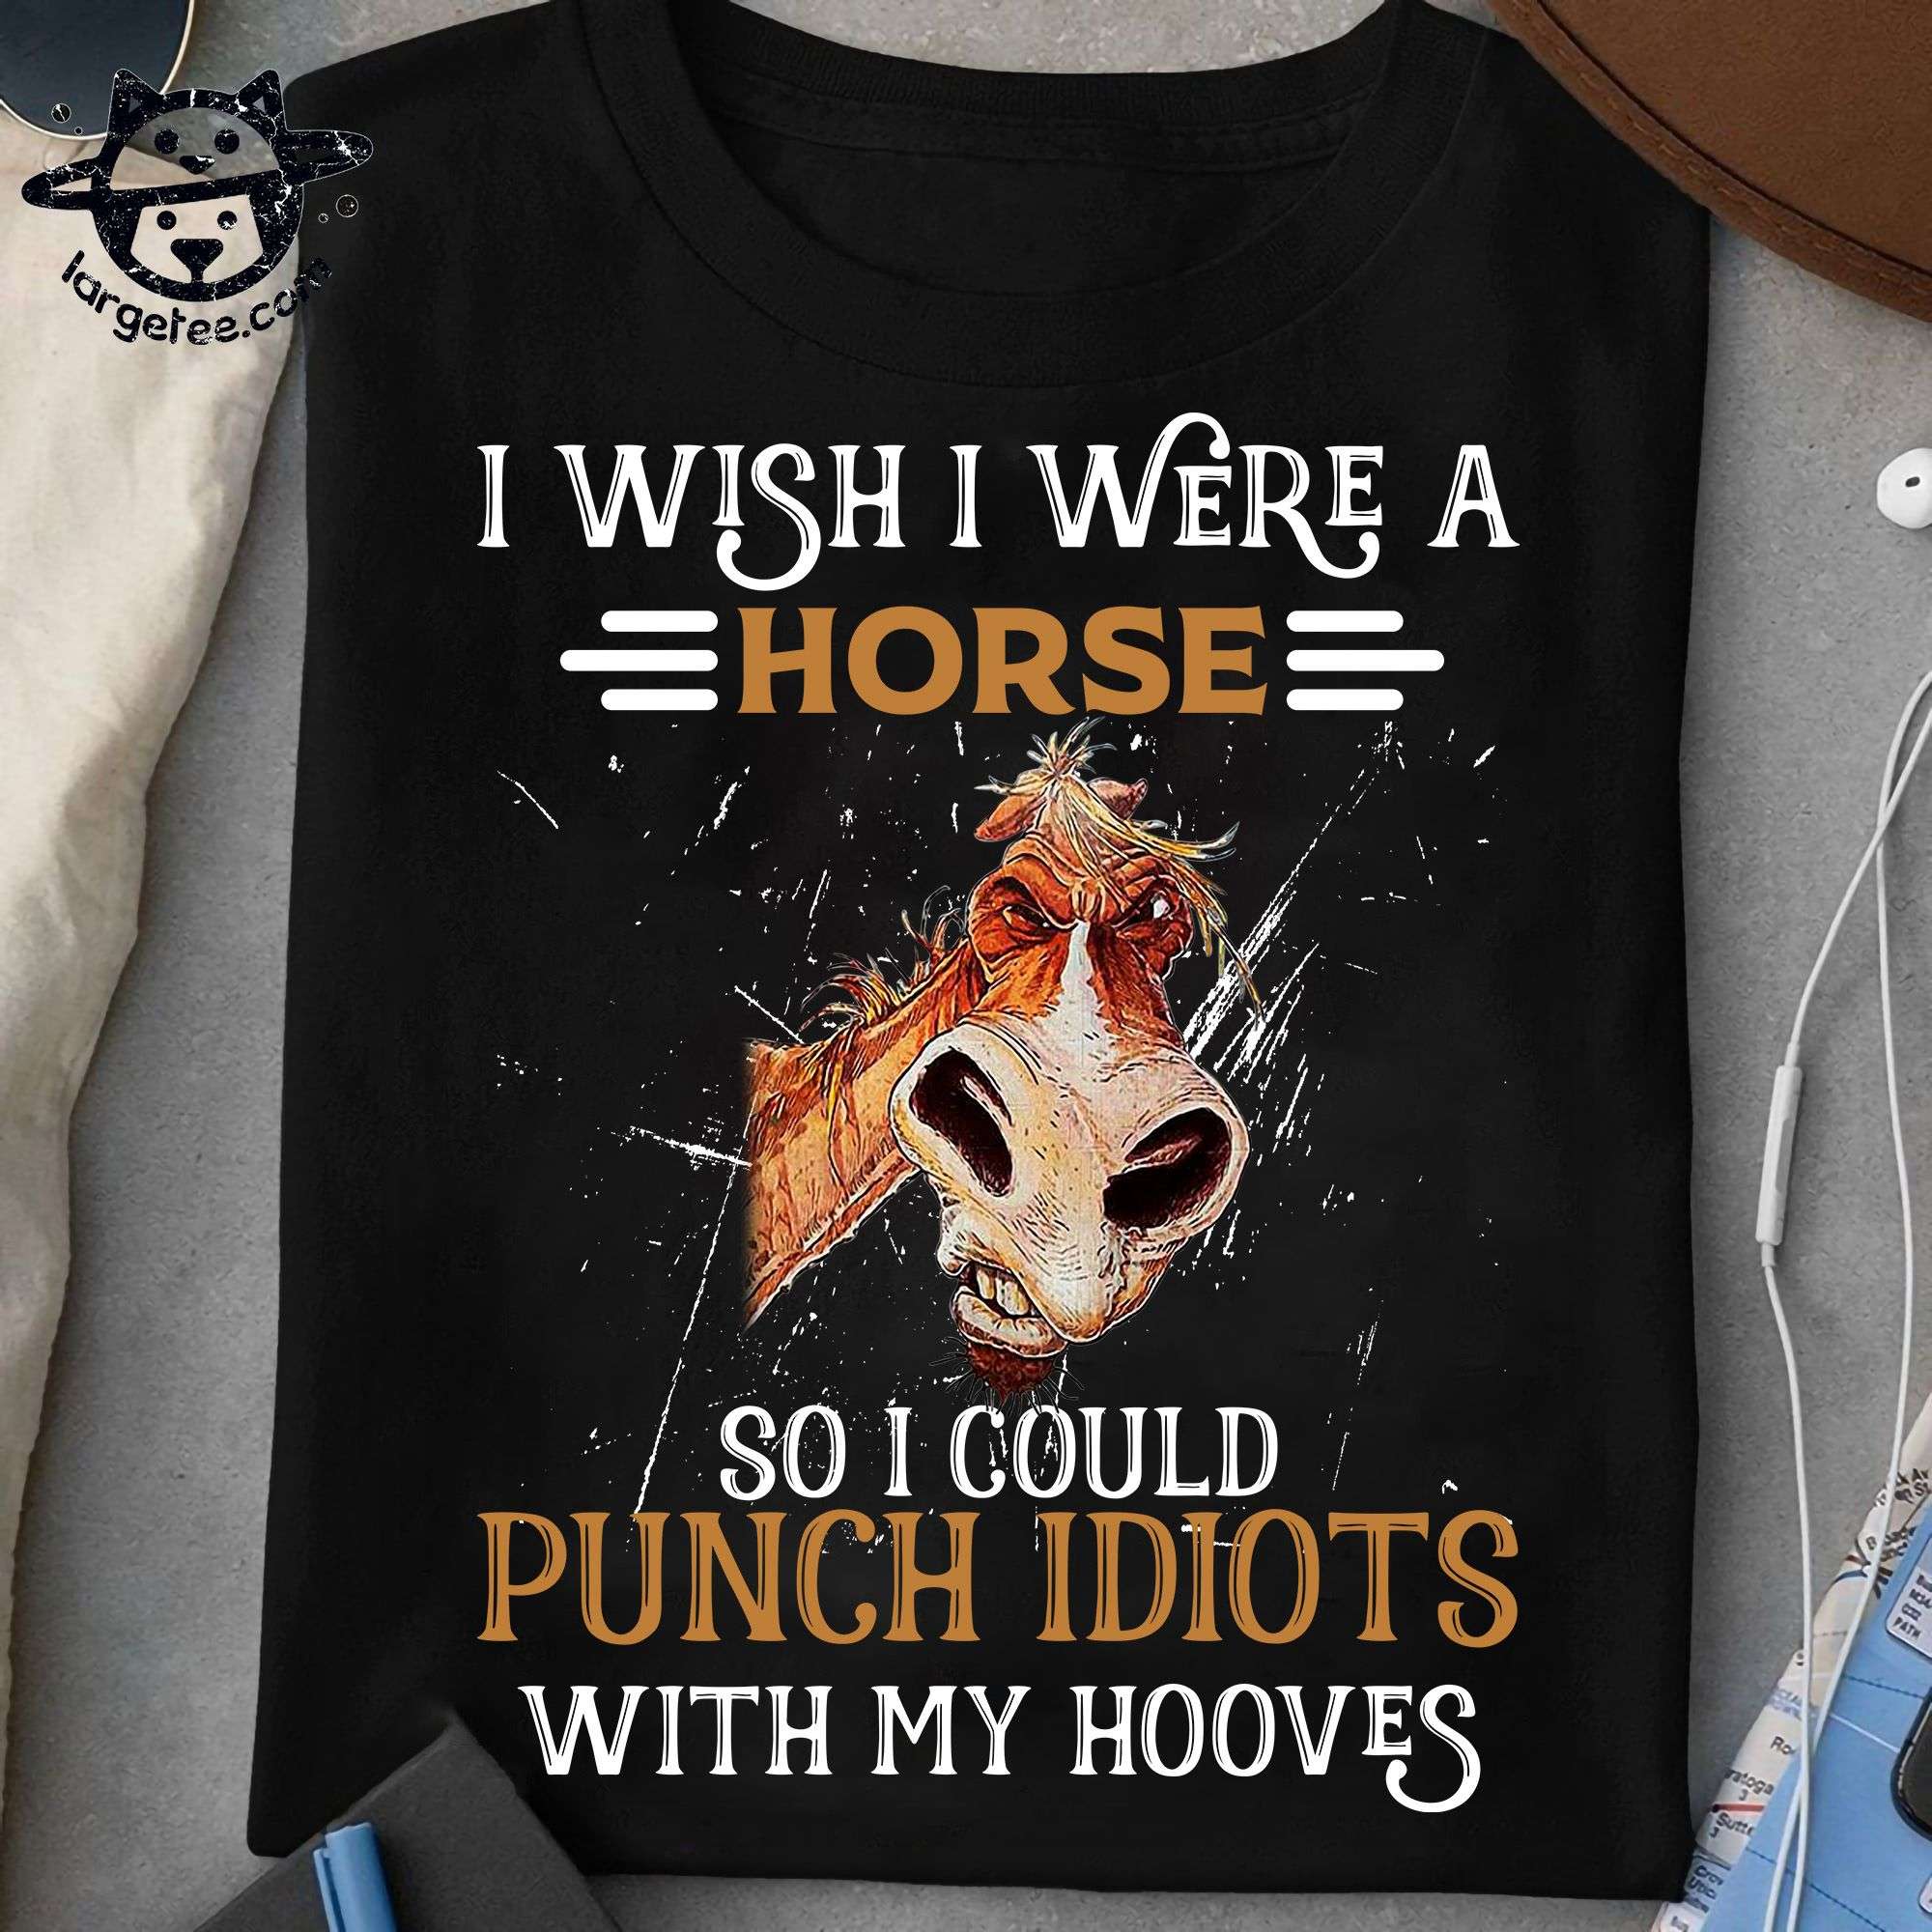 Grumpy Horse - I wish i were a horse so i could punch idiots with my hooves